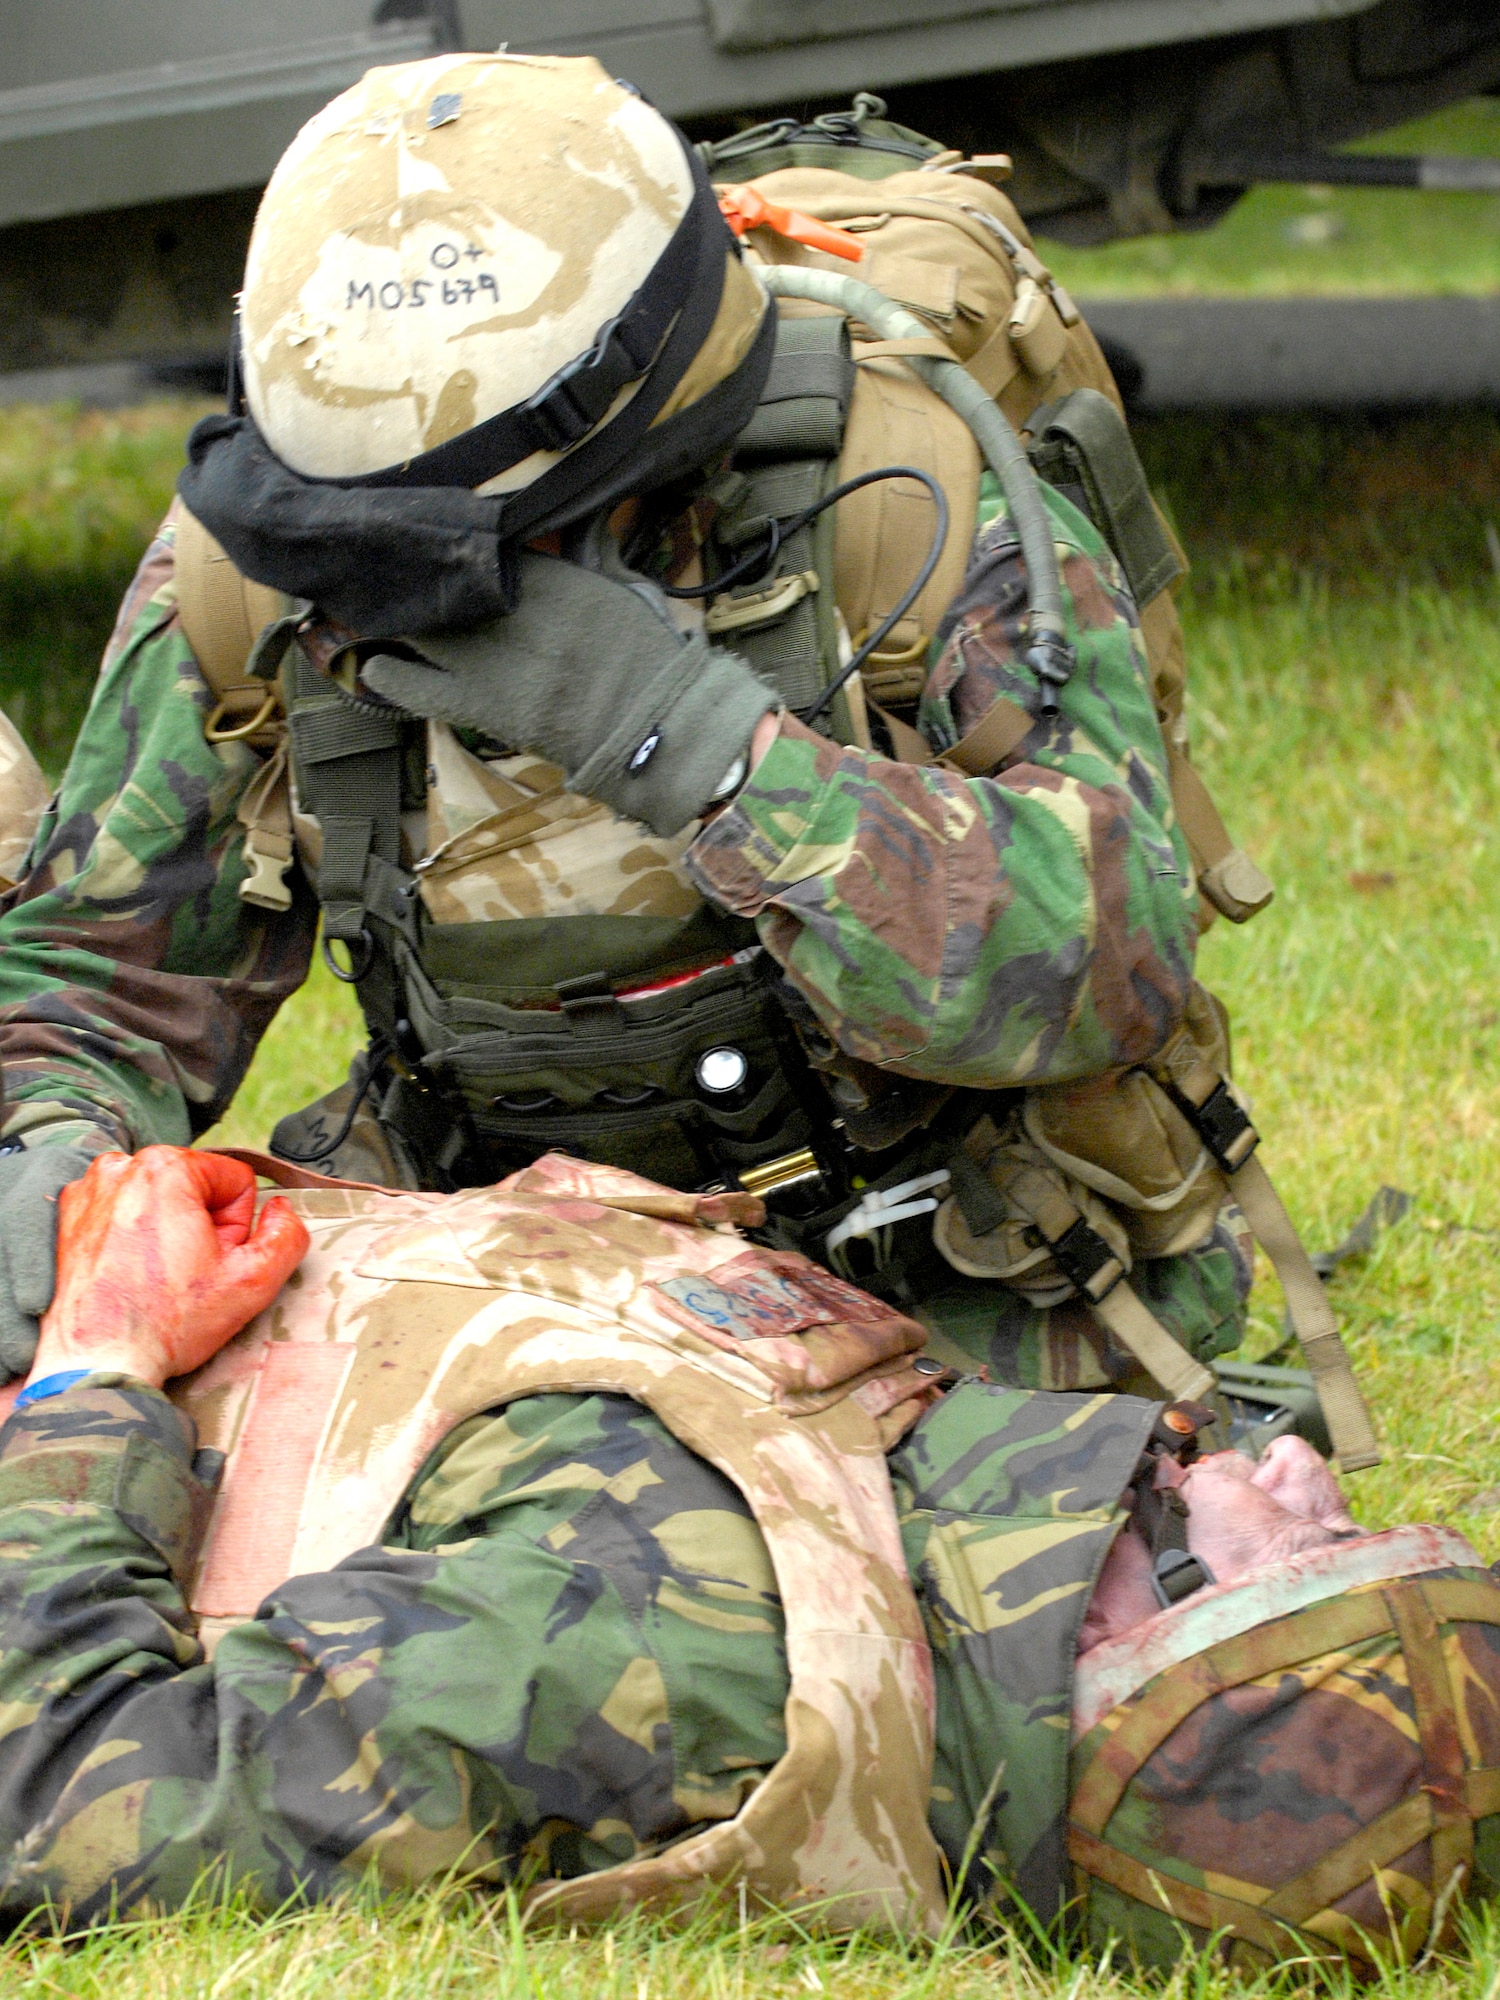 A 51 Squadron Royal Air Force Regiment combat medic from RAF Honington, Norfolk, England, shows signs of fatigue, while treating patients during an exercise combat scenario. The RAF Regiment now uses volunteers who've lost a limb in battle but still want to serve as patients. Utilizing special moulage teams and the fact that the members already have a missing limb, combat medic trainers are able to give their new medics realistic human casualties to treat.  (Royal Air Force Photo)